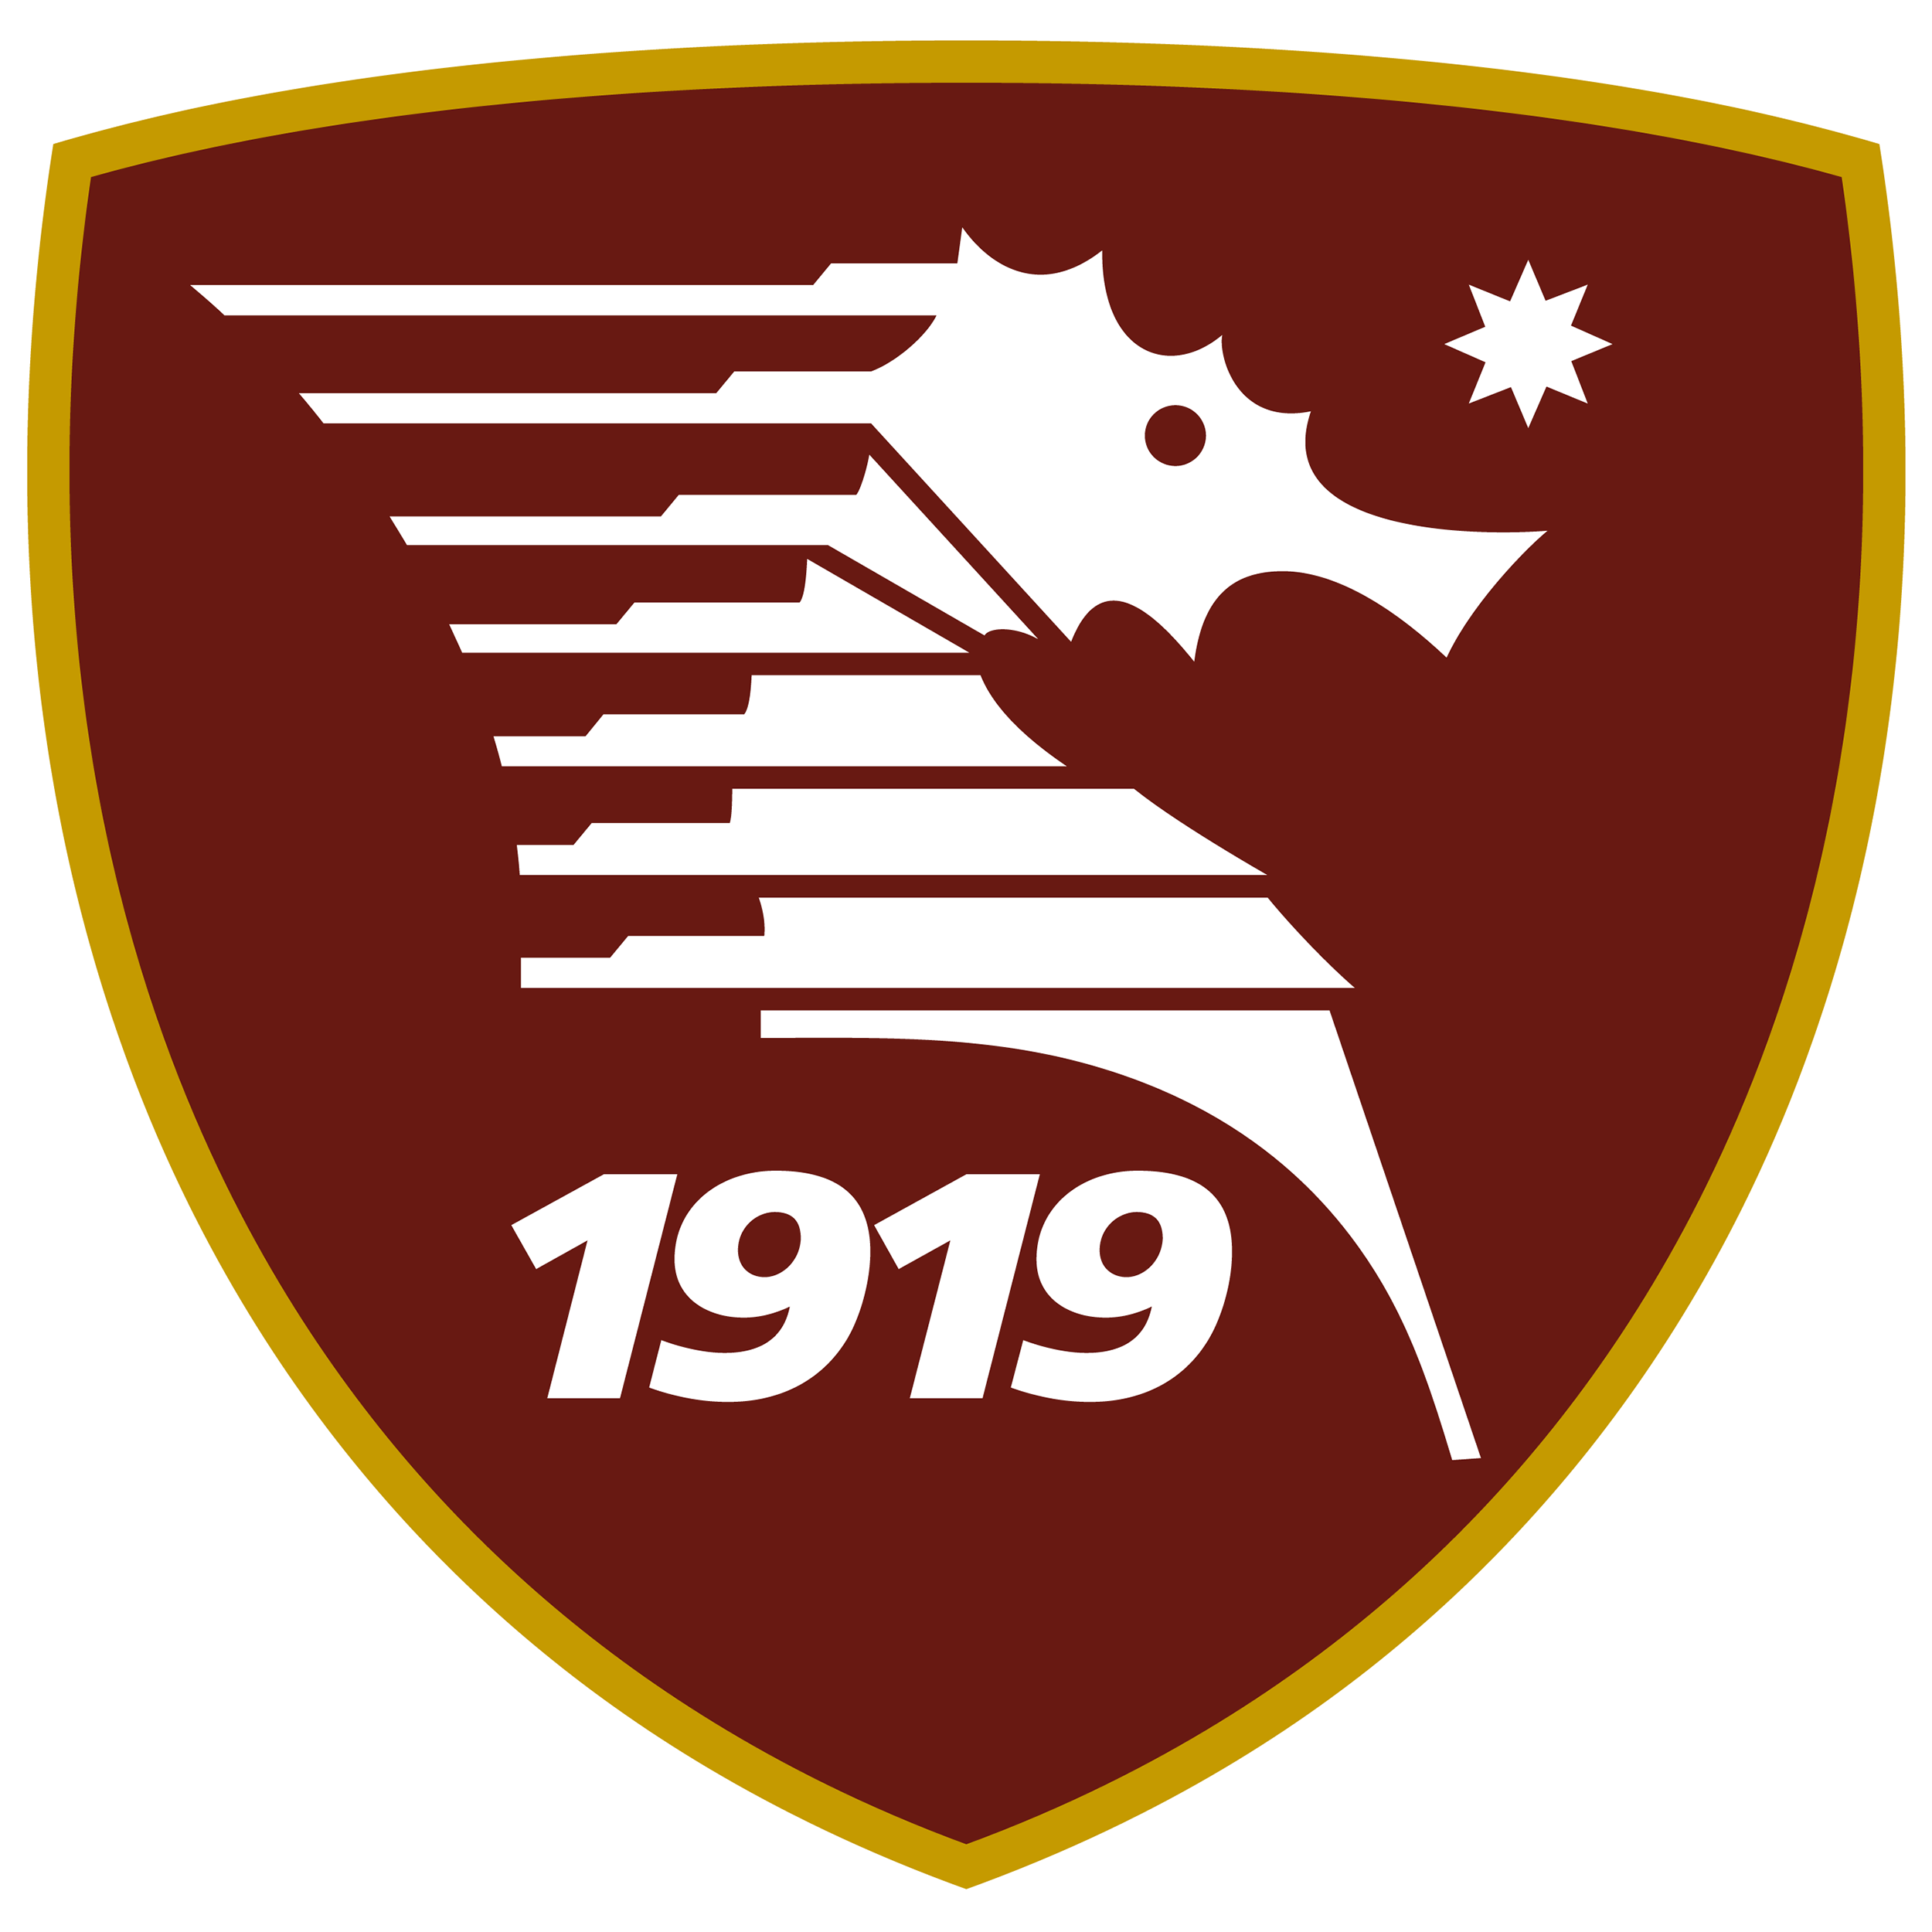 Frosinone vs Salernitana Prediction: Who will turn out to be stronger?